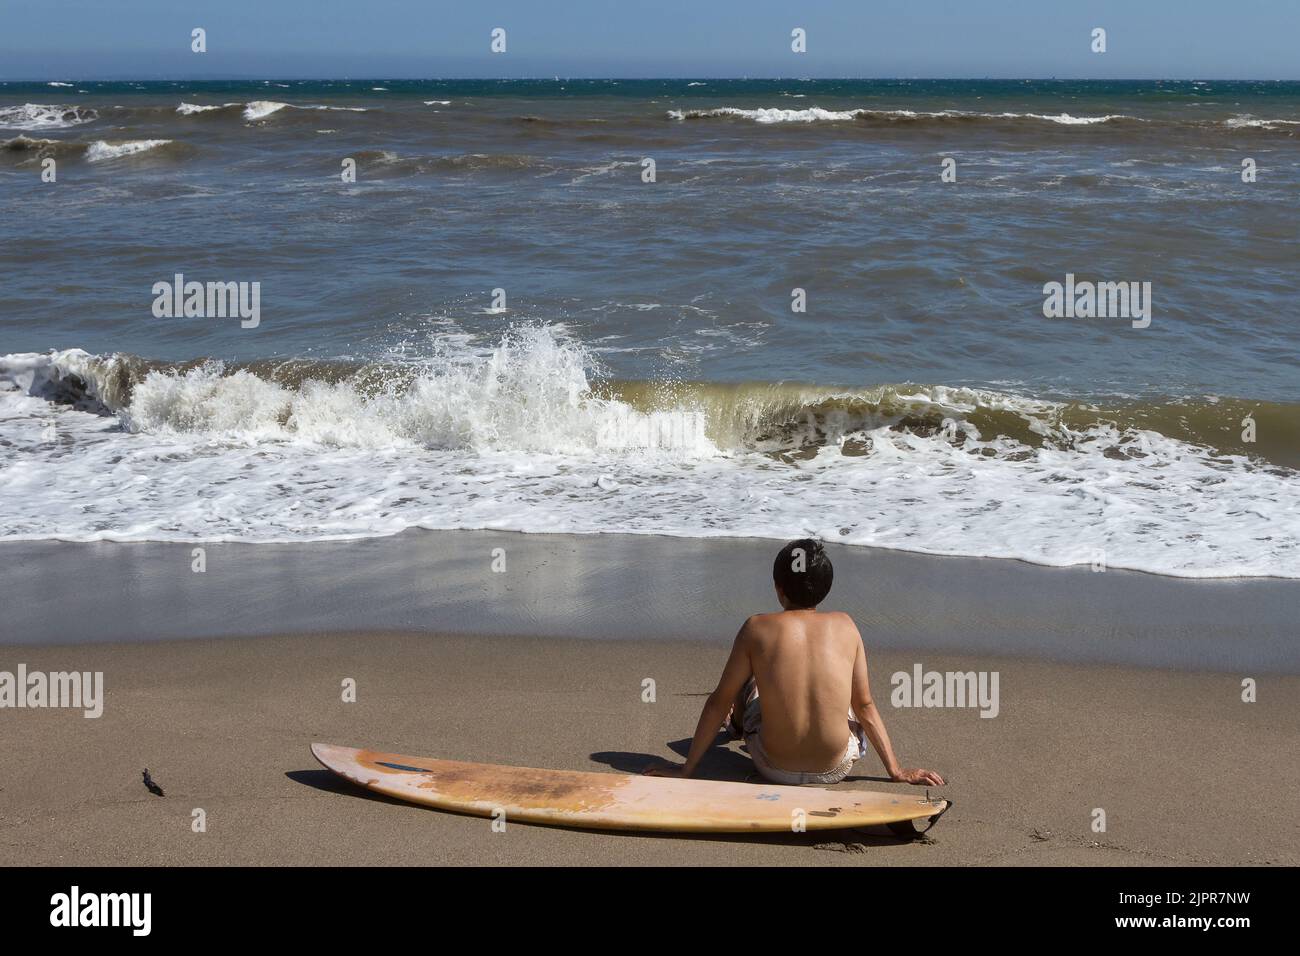 A surfer sit by his surfboard on the beach watching the waves. Enoshima, Kanagawa, Japan. Stock Photo